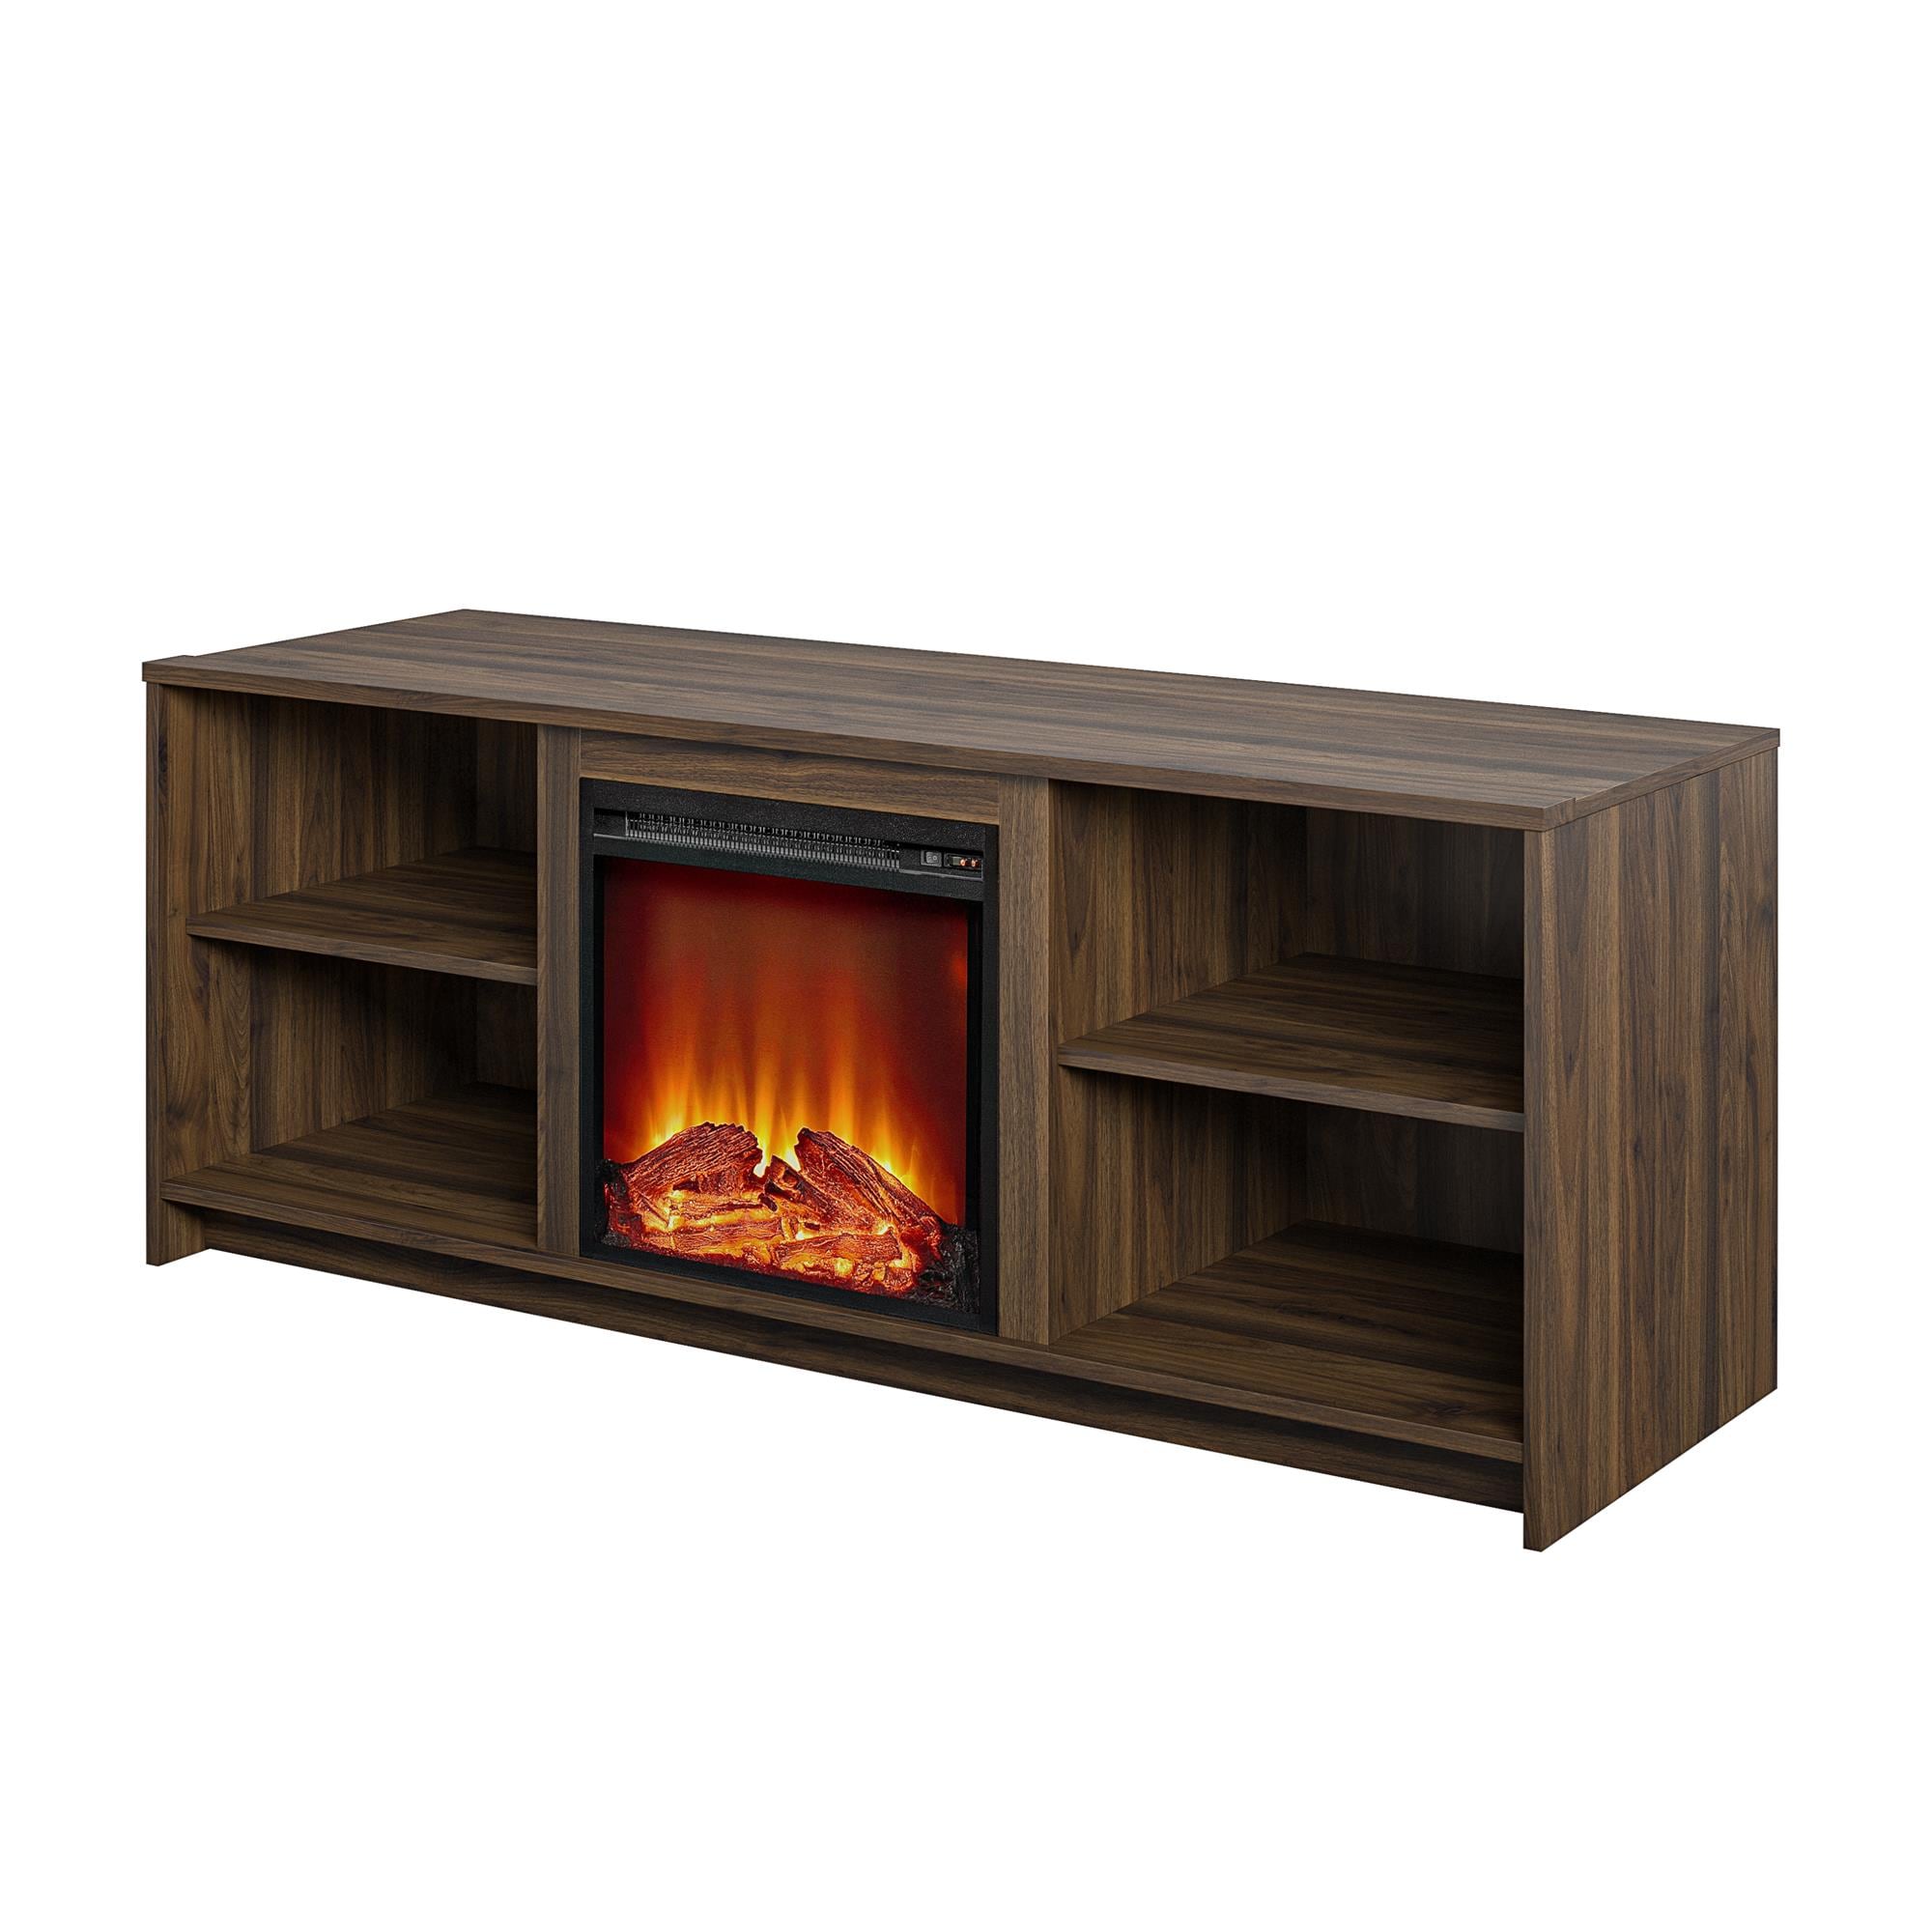 Ameriwood Home Vaughn Electric Fireplace TV Stand Walnut 